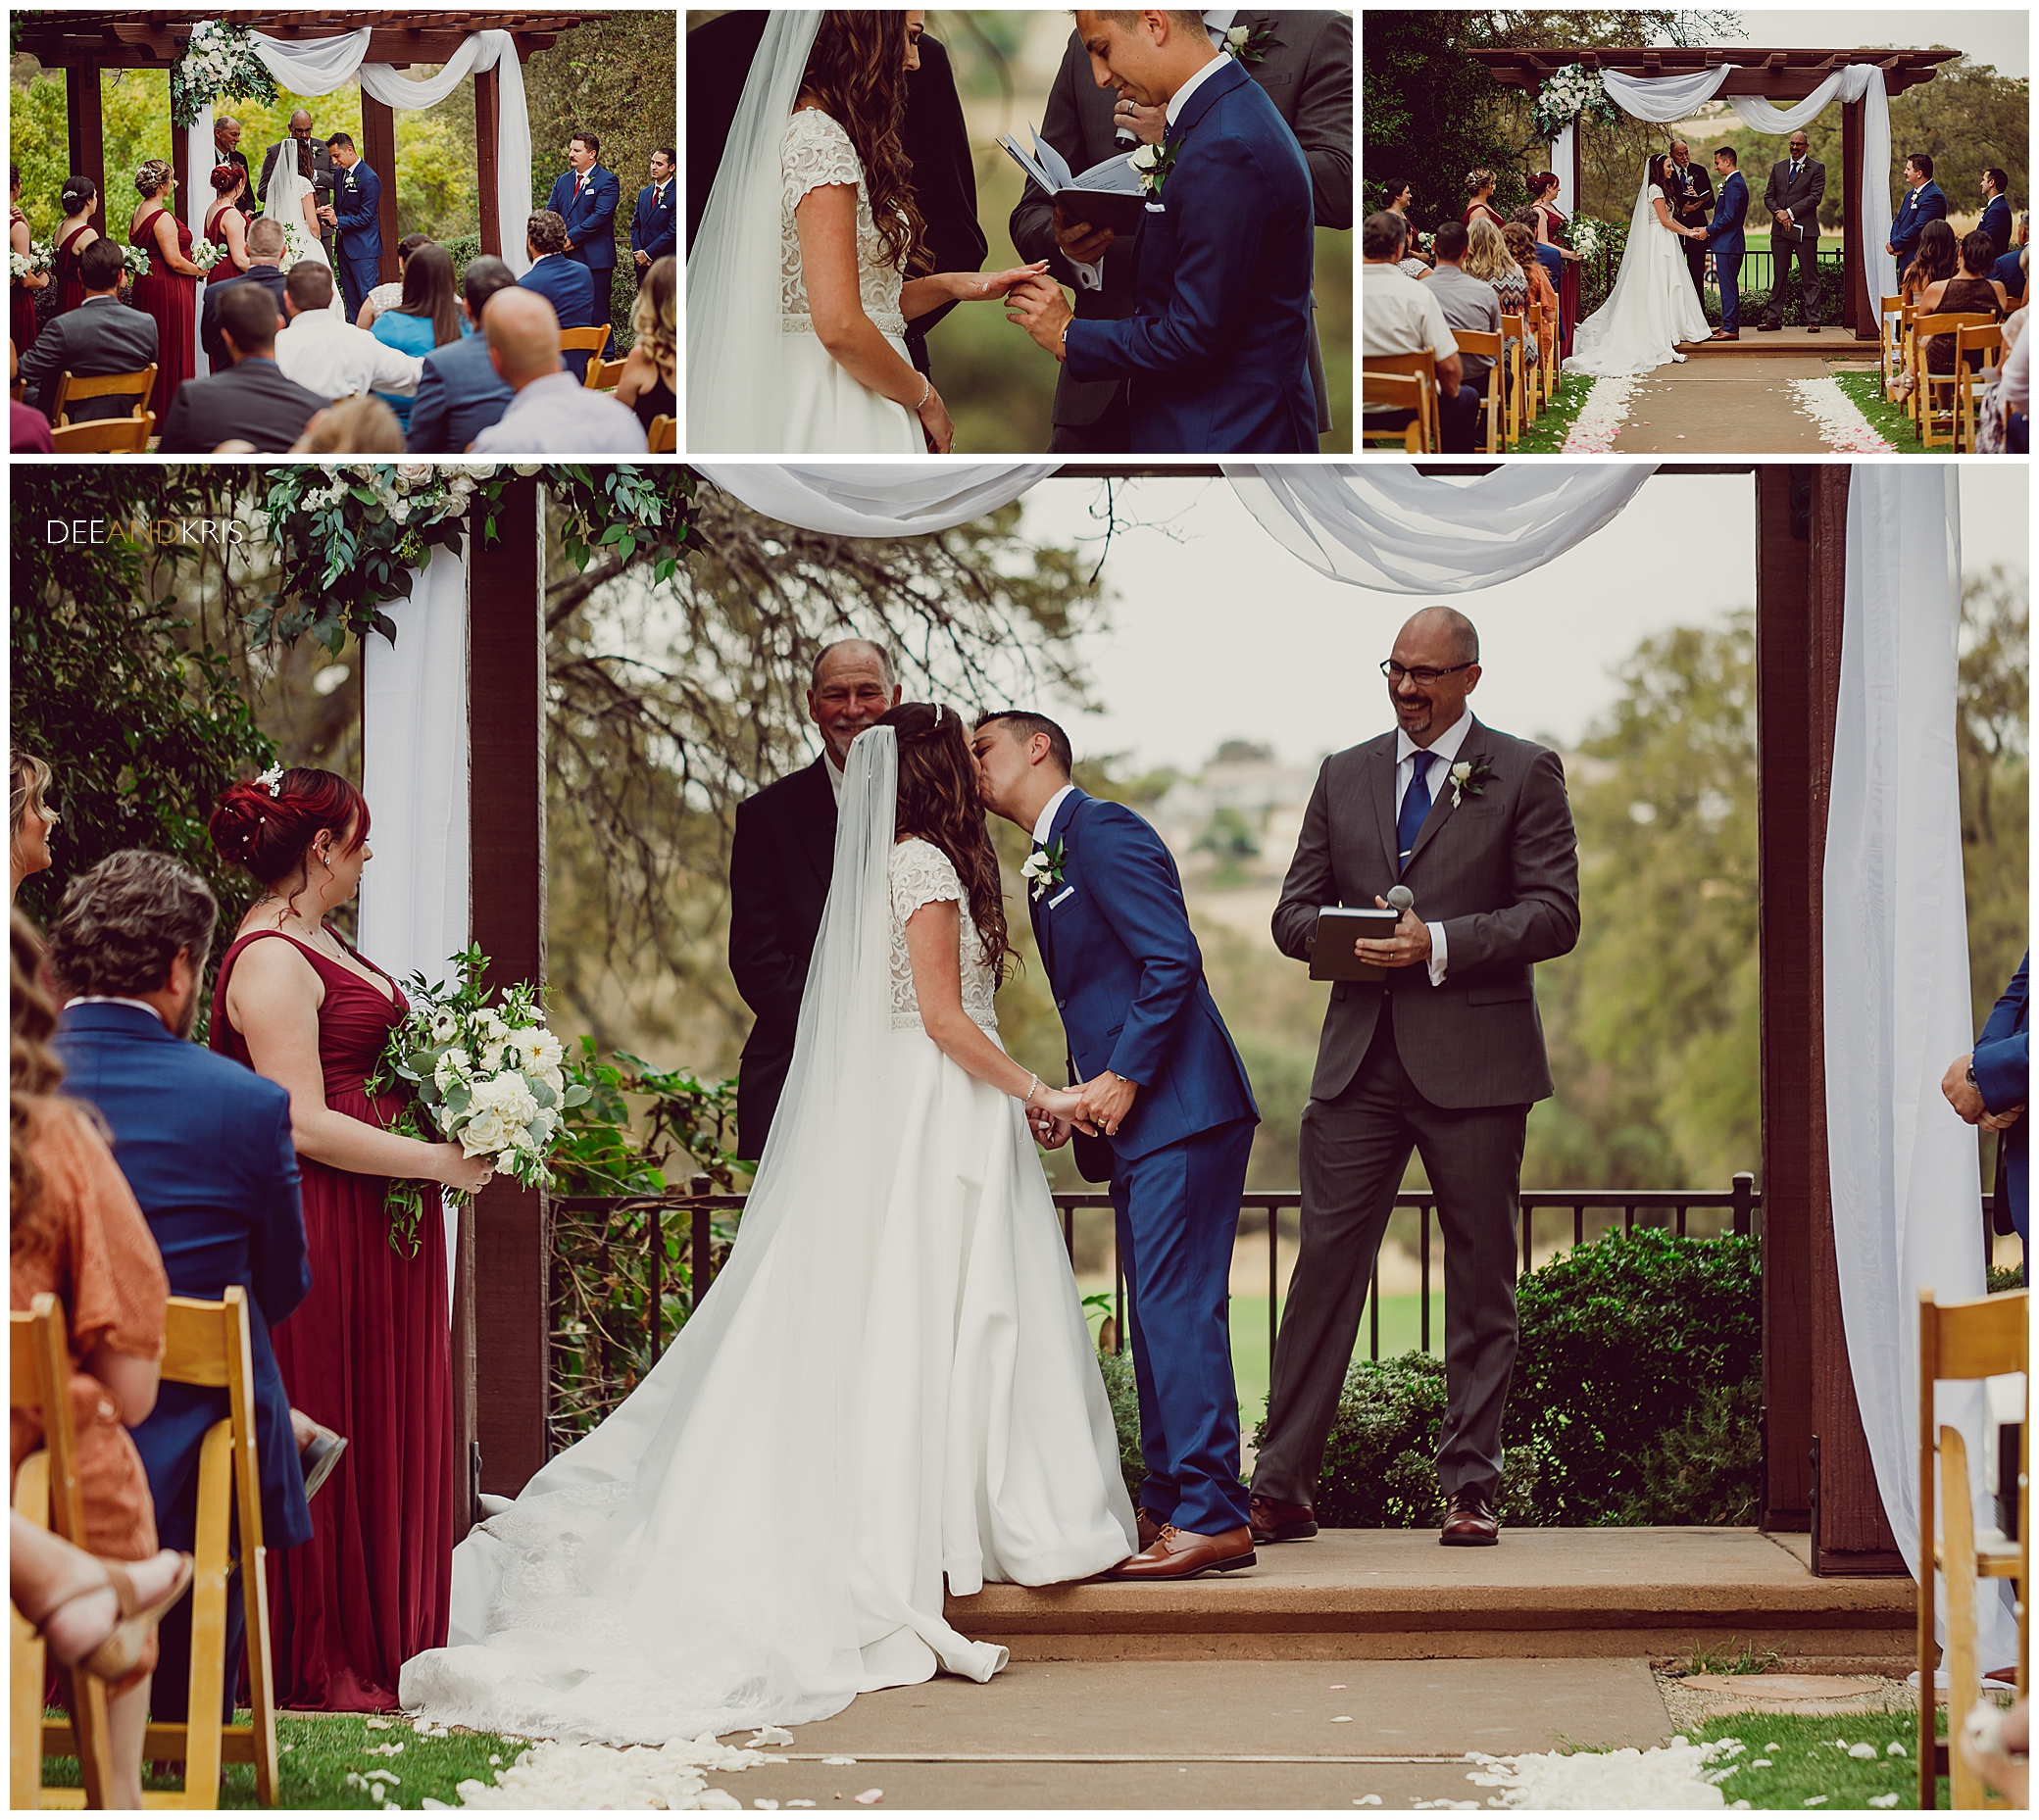 Bride and groom exchange vows at Catta Verdera Country Club ceremony site